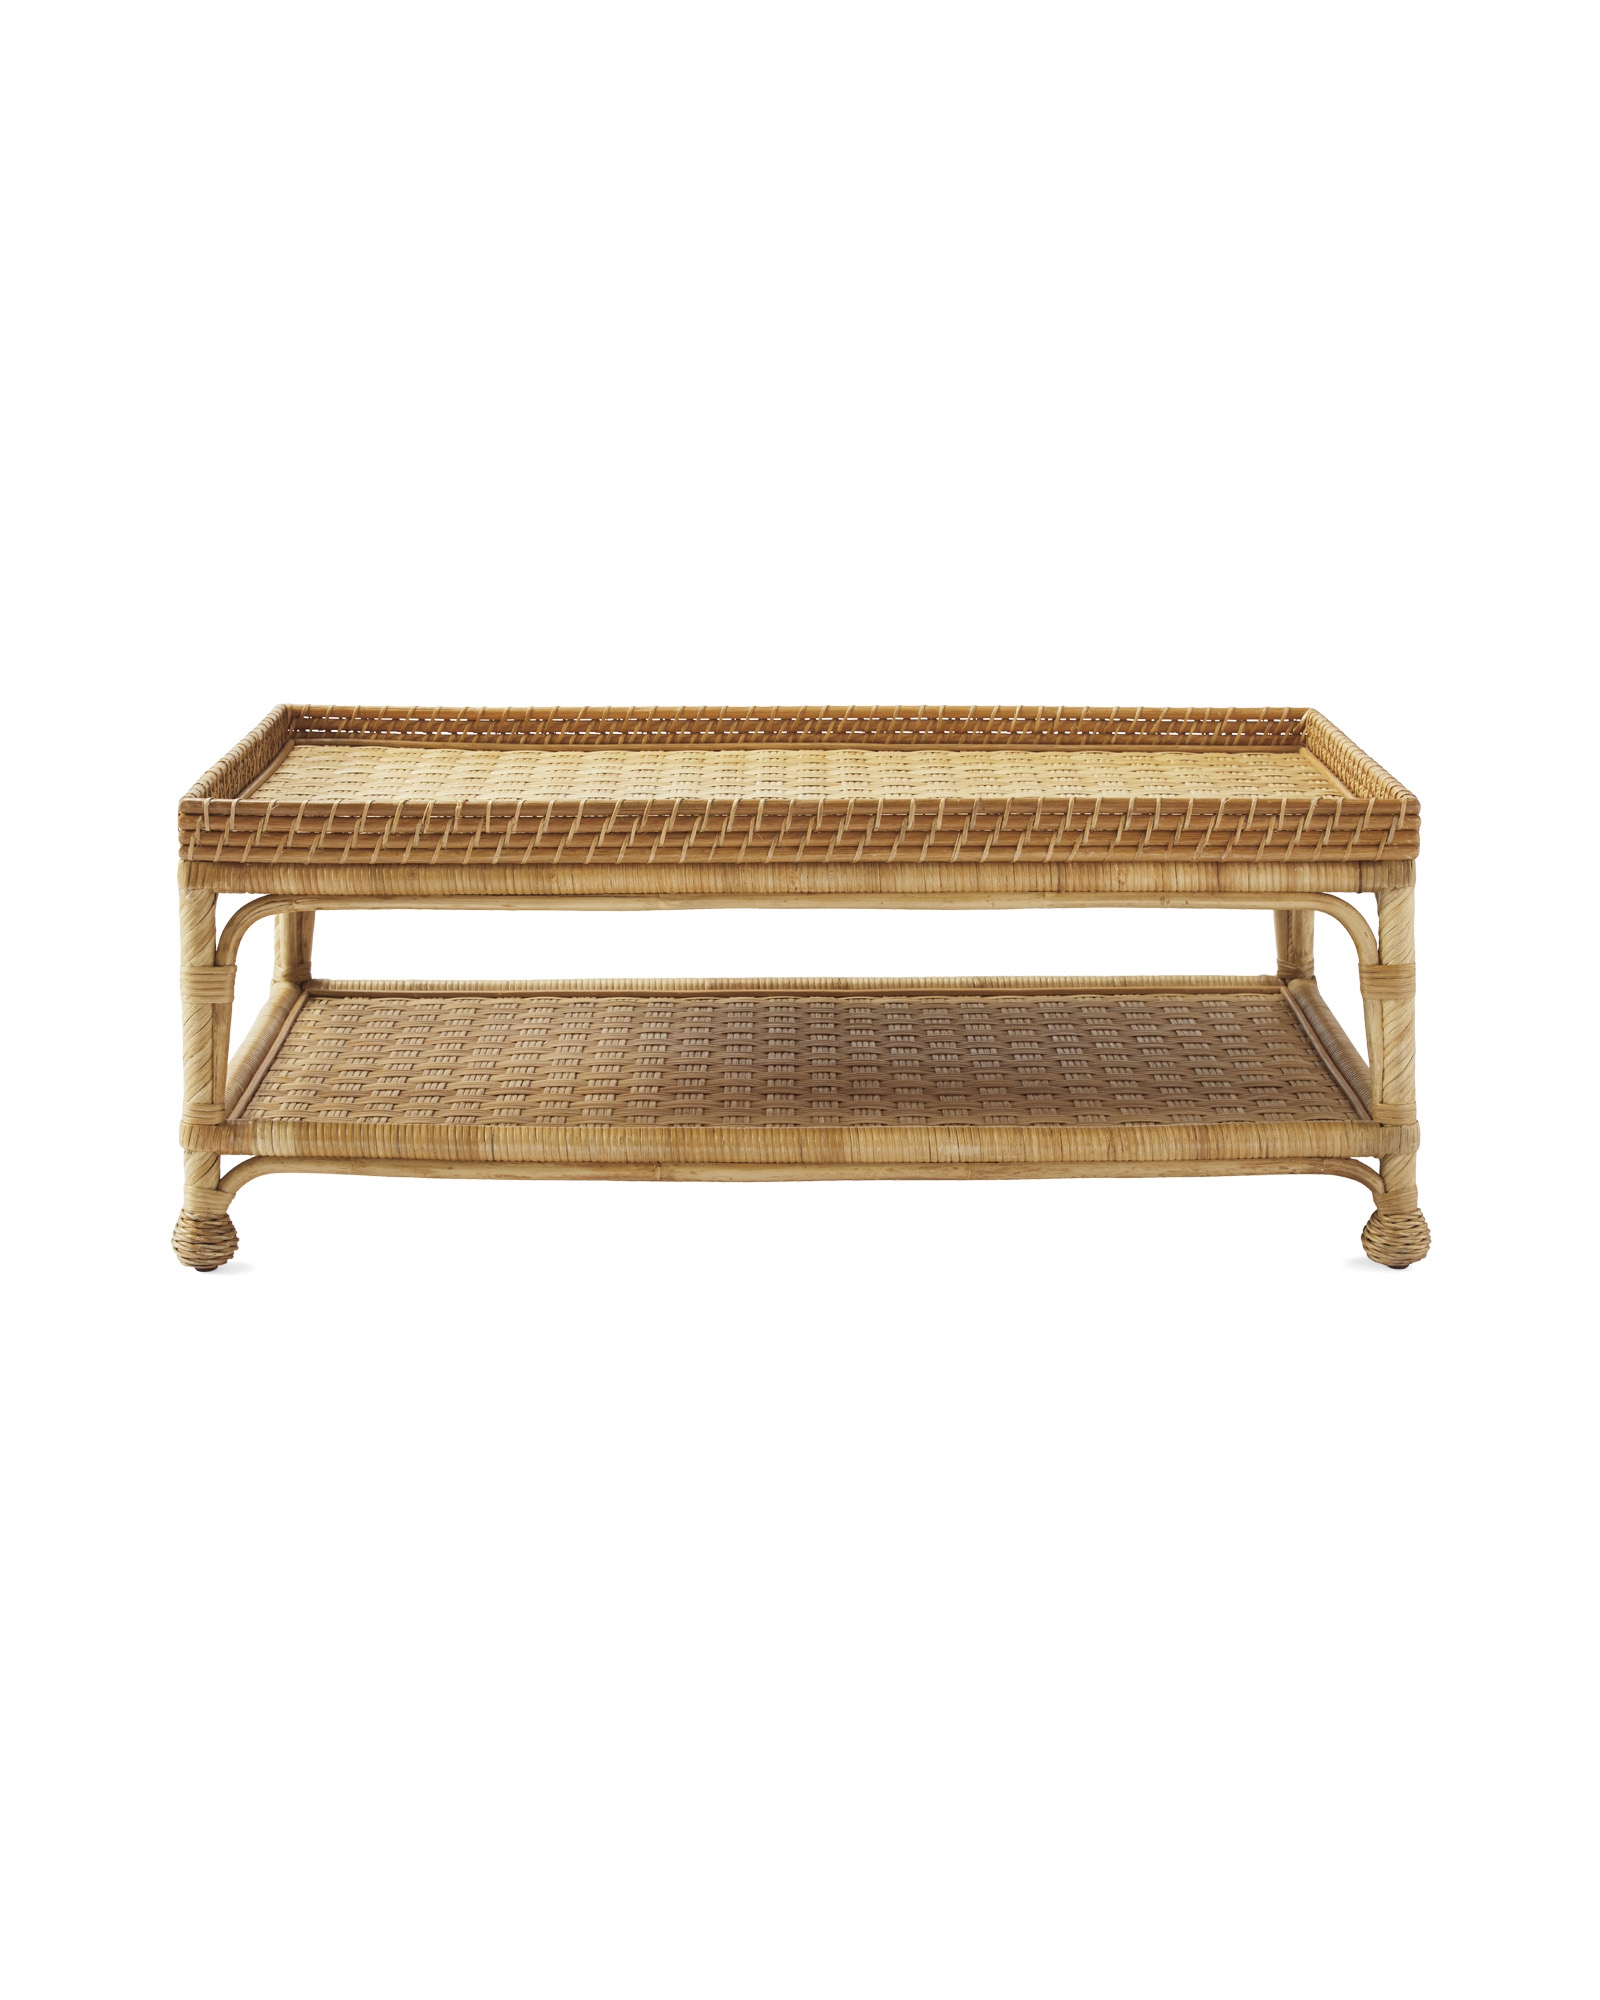 South Seas Coffee Table - Natural - Image 2